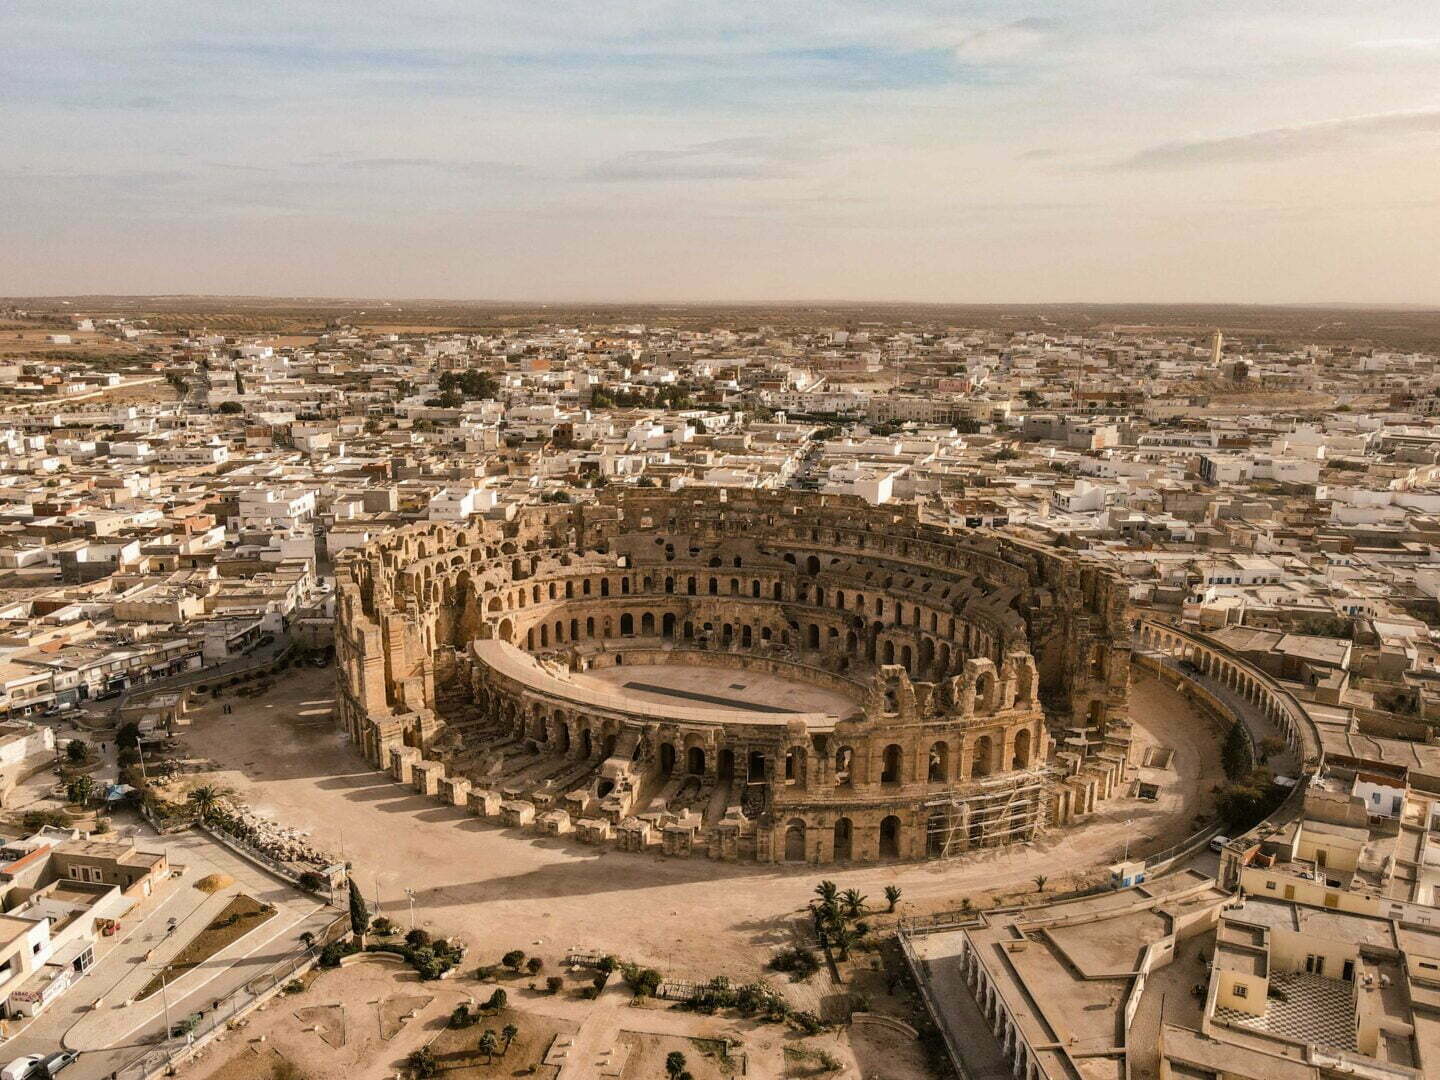 19-astonishing-facts-about-el-djem